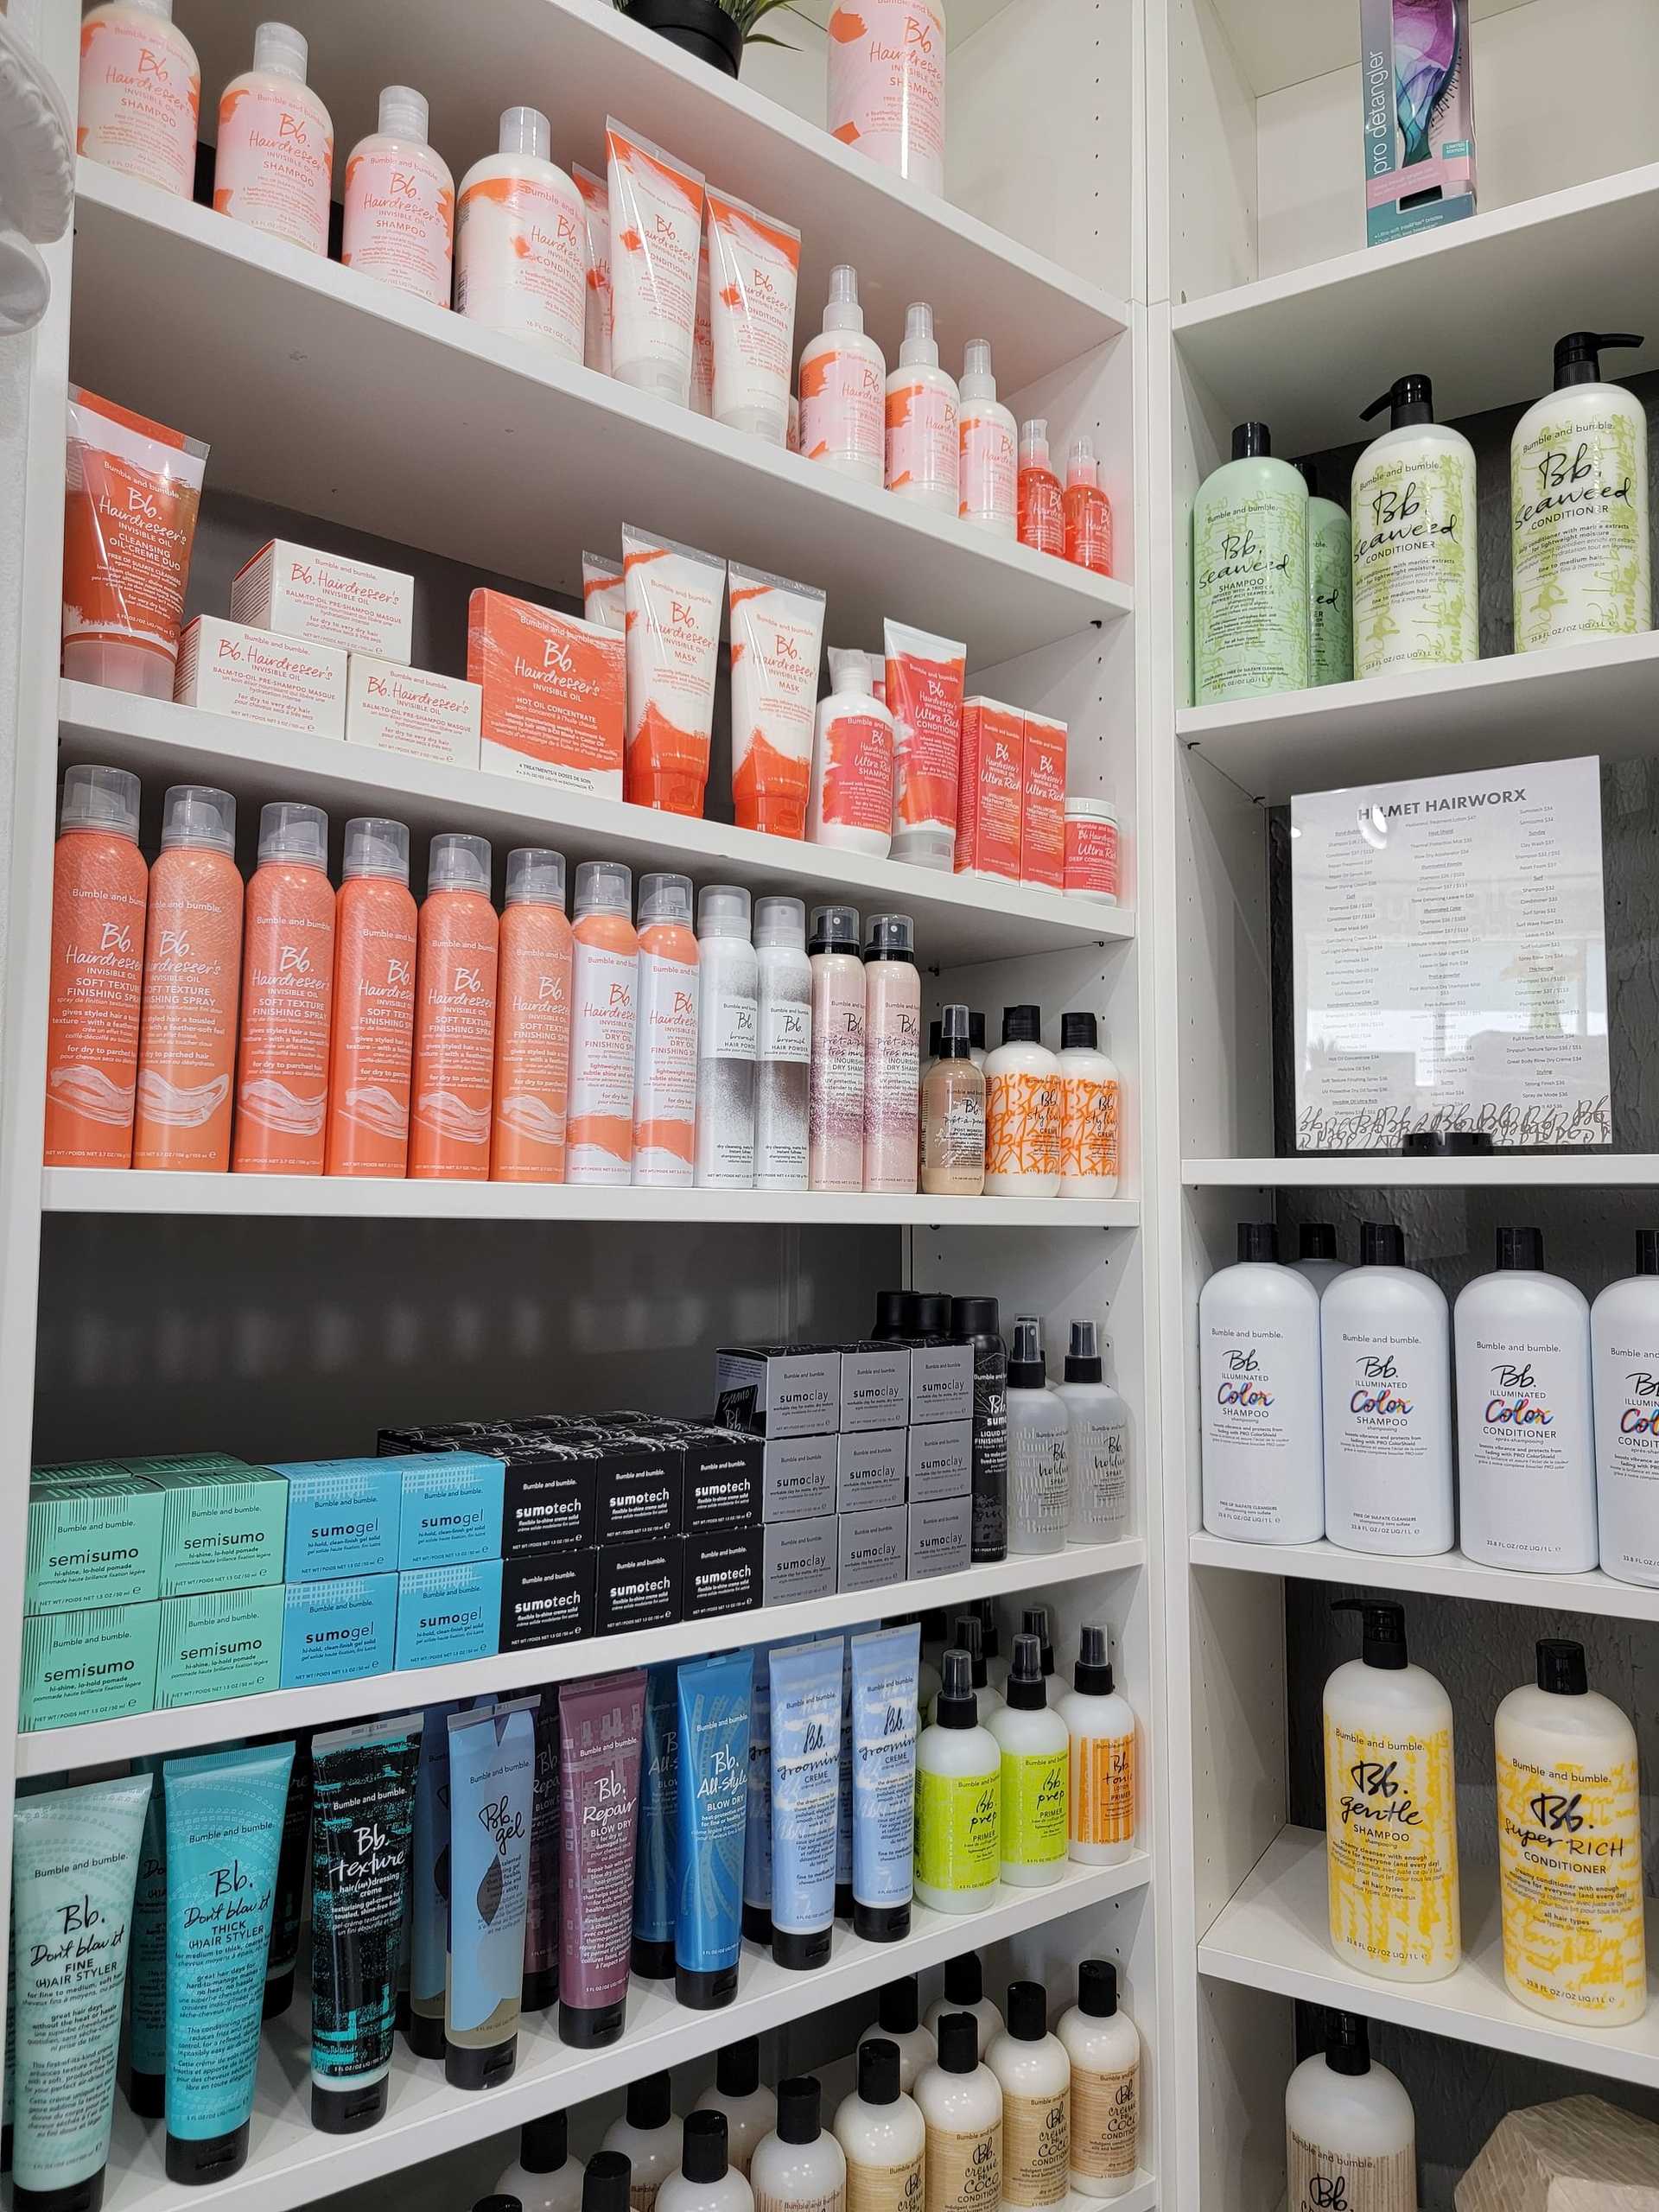 Shelves stocked with various hair care products in a salon.